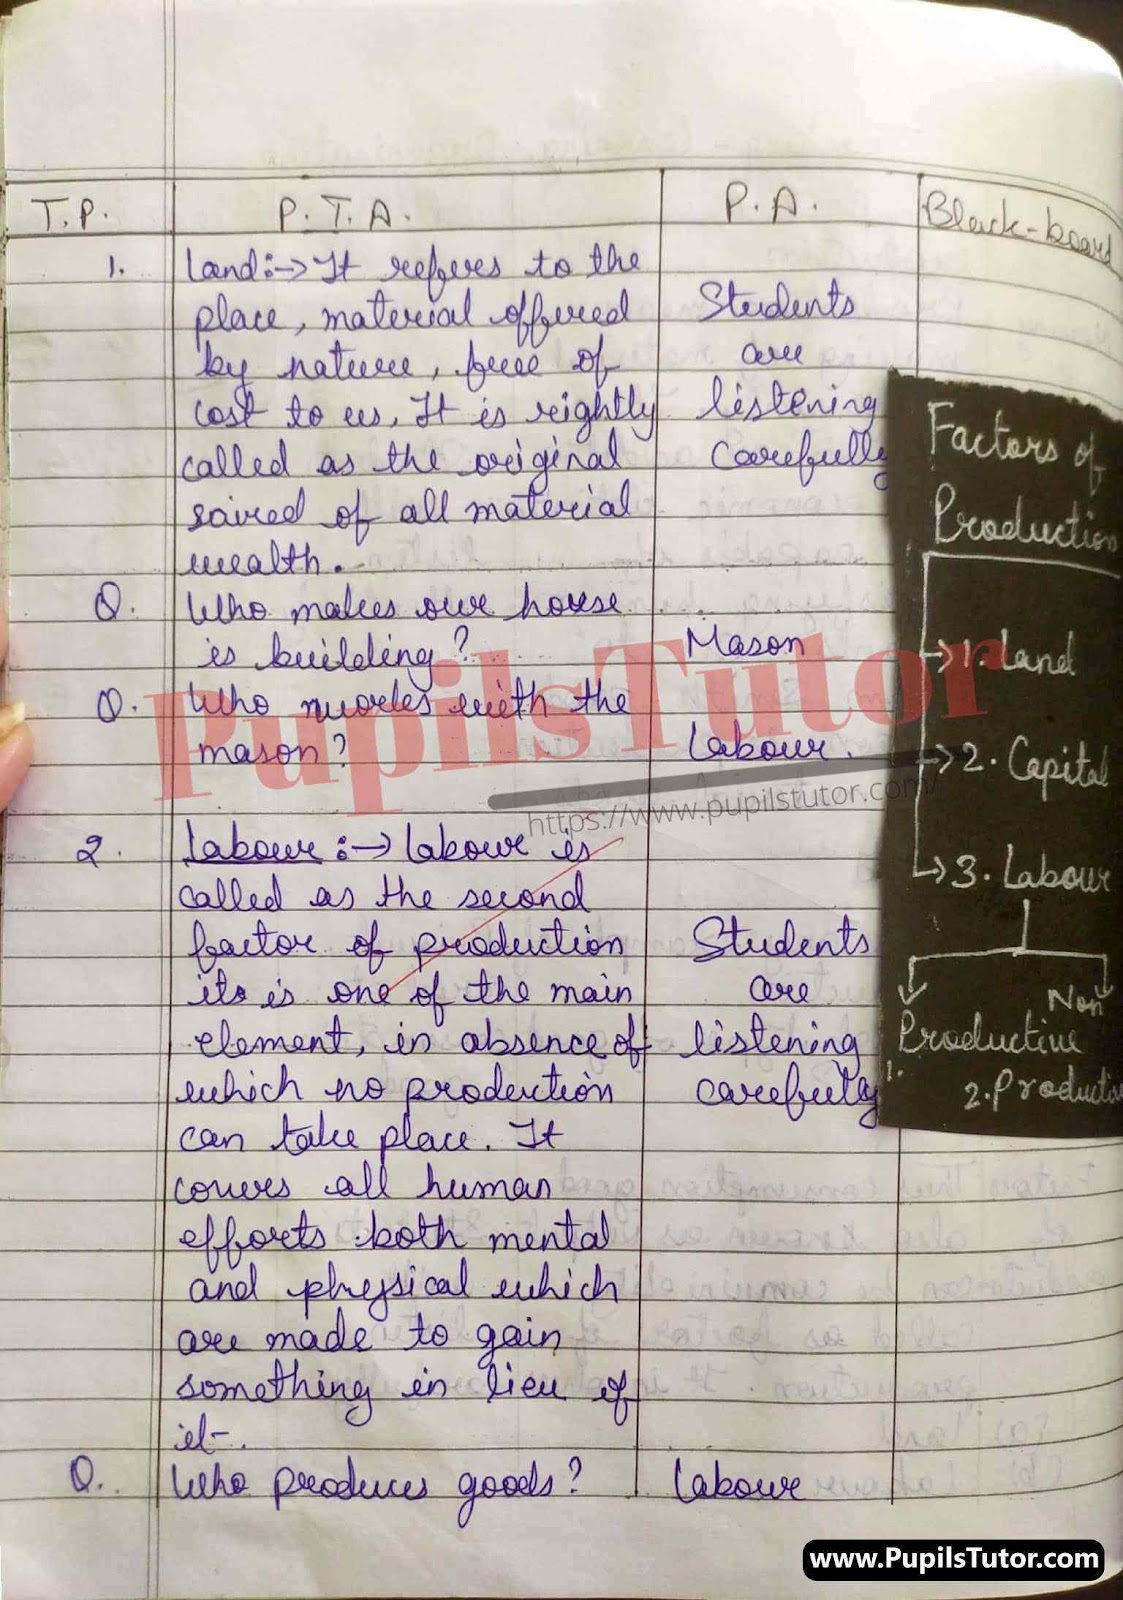 BED, DELED, BTC, BSTC, M.ED, DED And NIOS Teaching Of Economics Innovative Digital Lesson Plan Format On Production Topic For Class 9th, 10th, 11th, 12th  – [Page And Photo 4] – pupilstutor.com